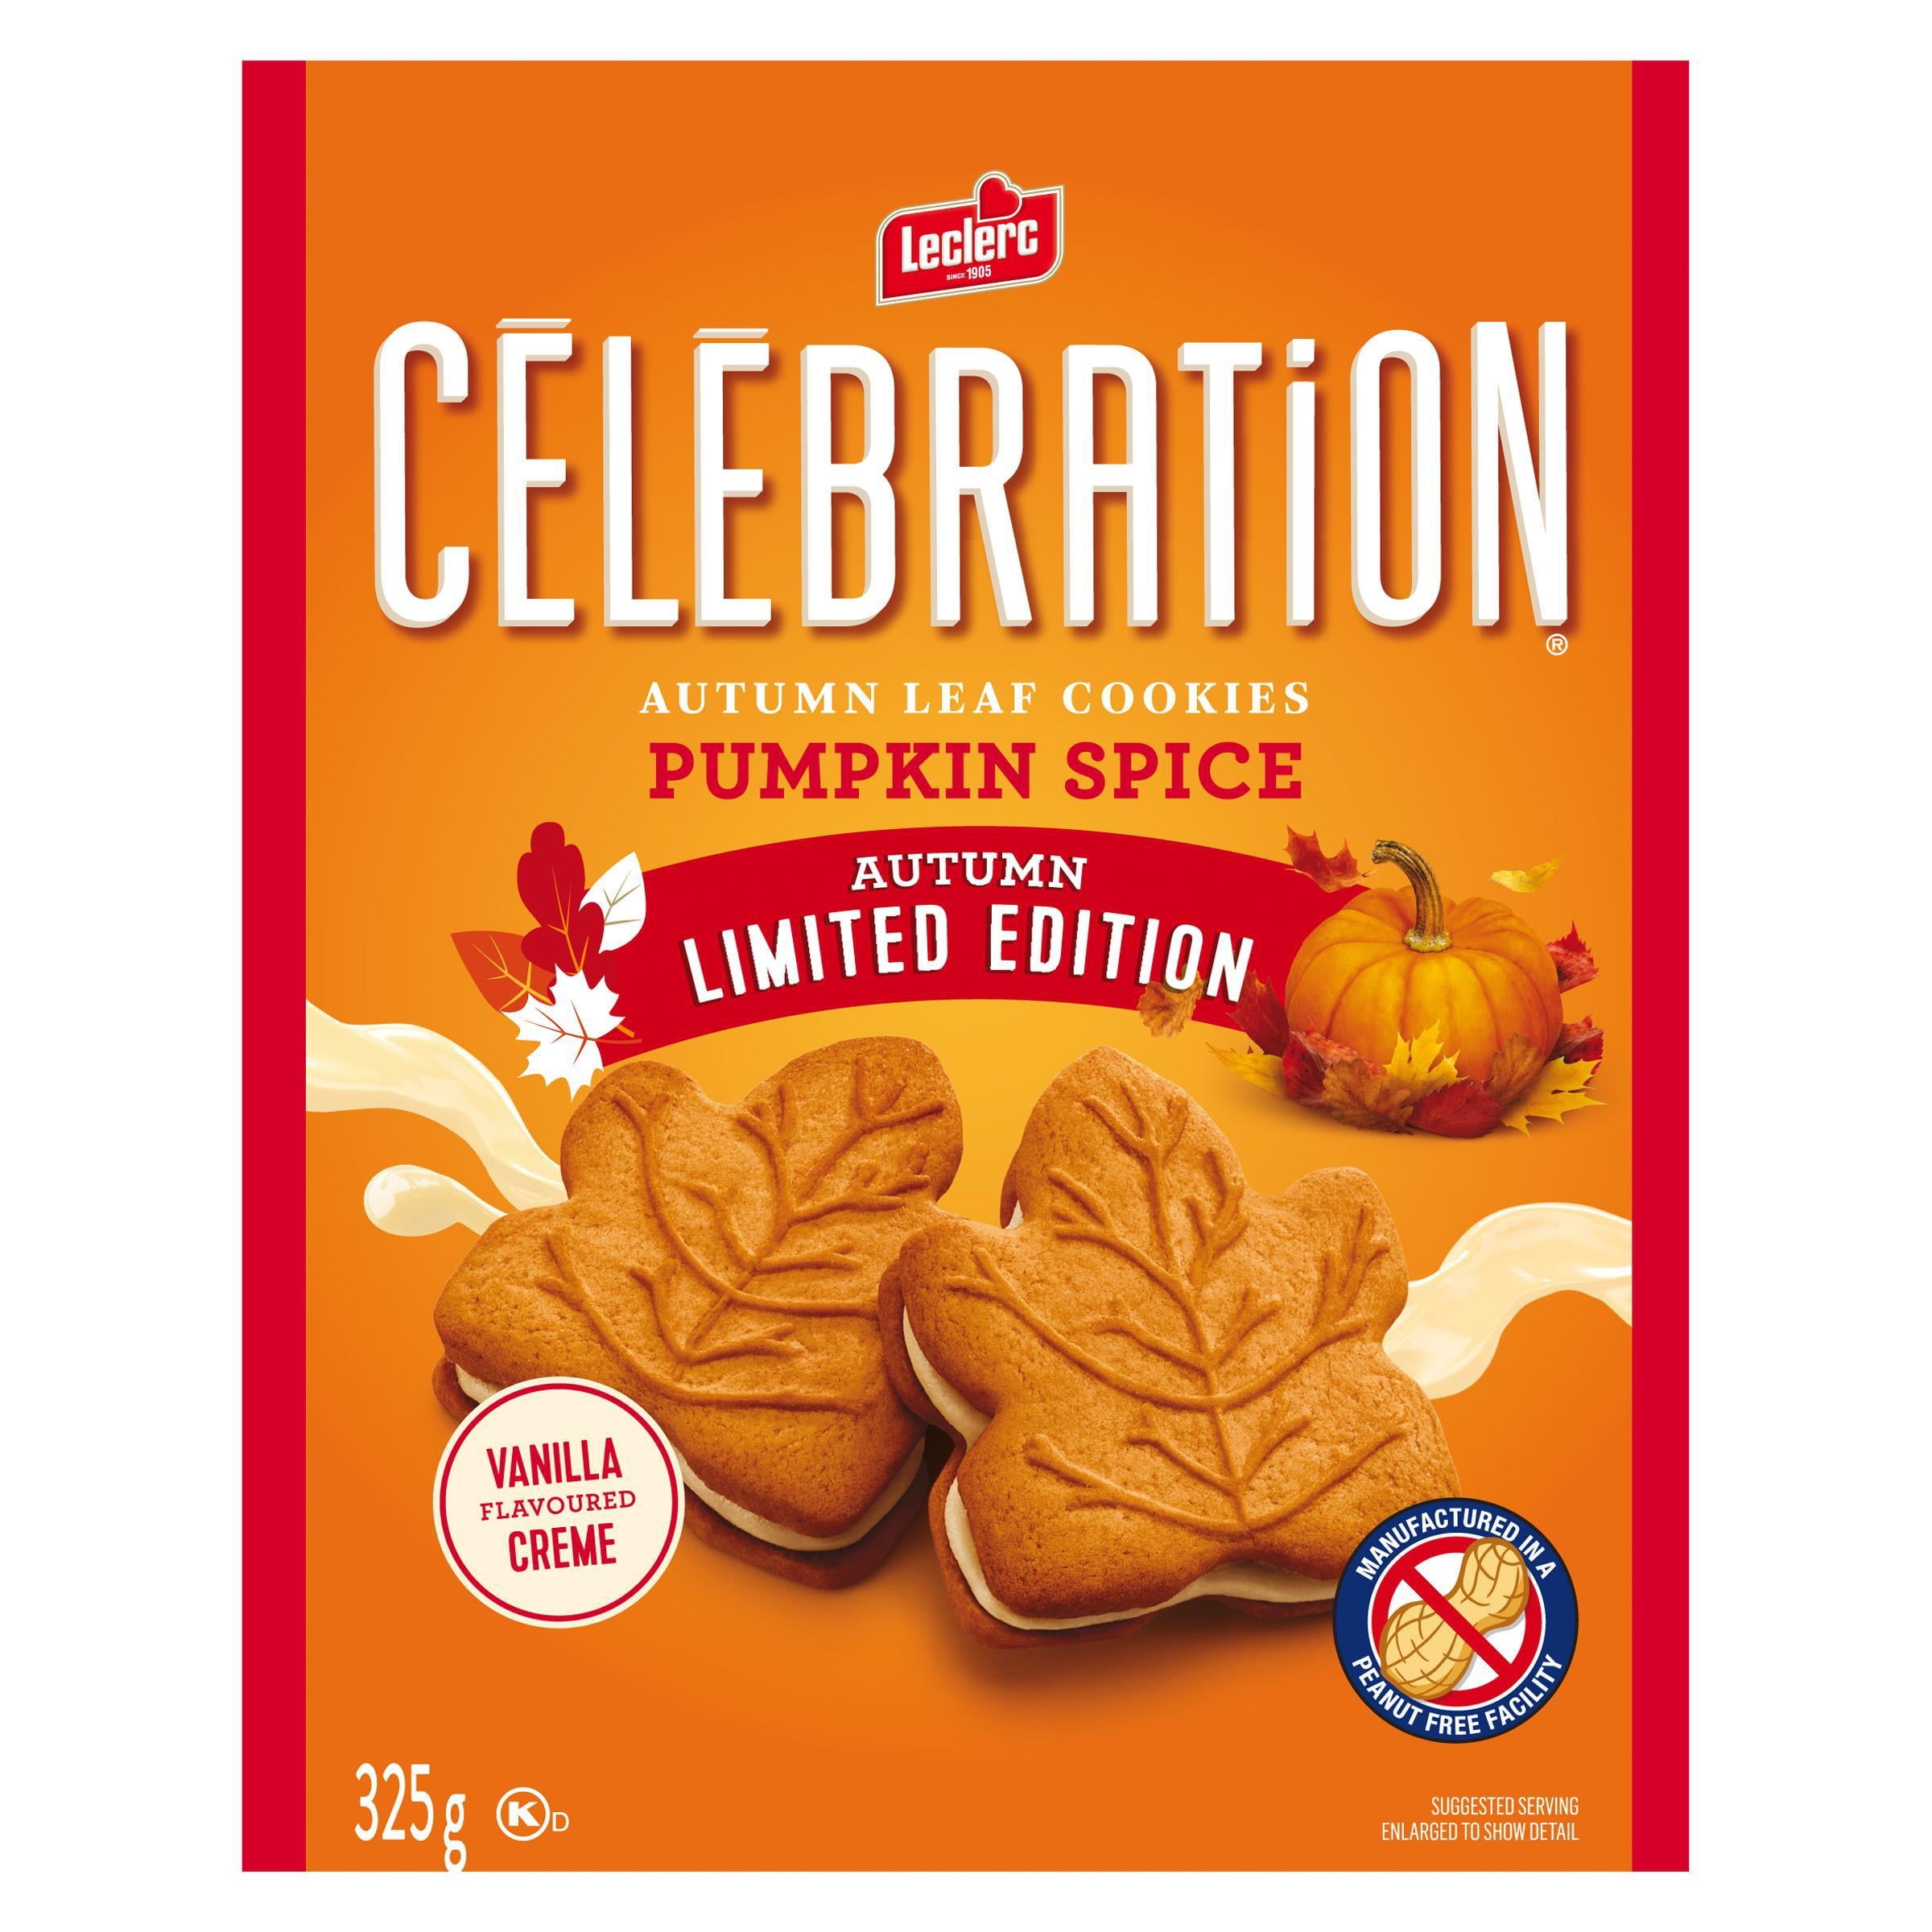 Leclerc Celebration Autumn Leaf Pumpkin Spice Flavored Cookies, 325g/11.4 oz. Box {Imported from Canada}